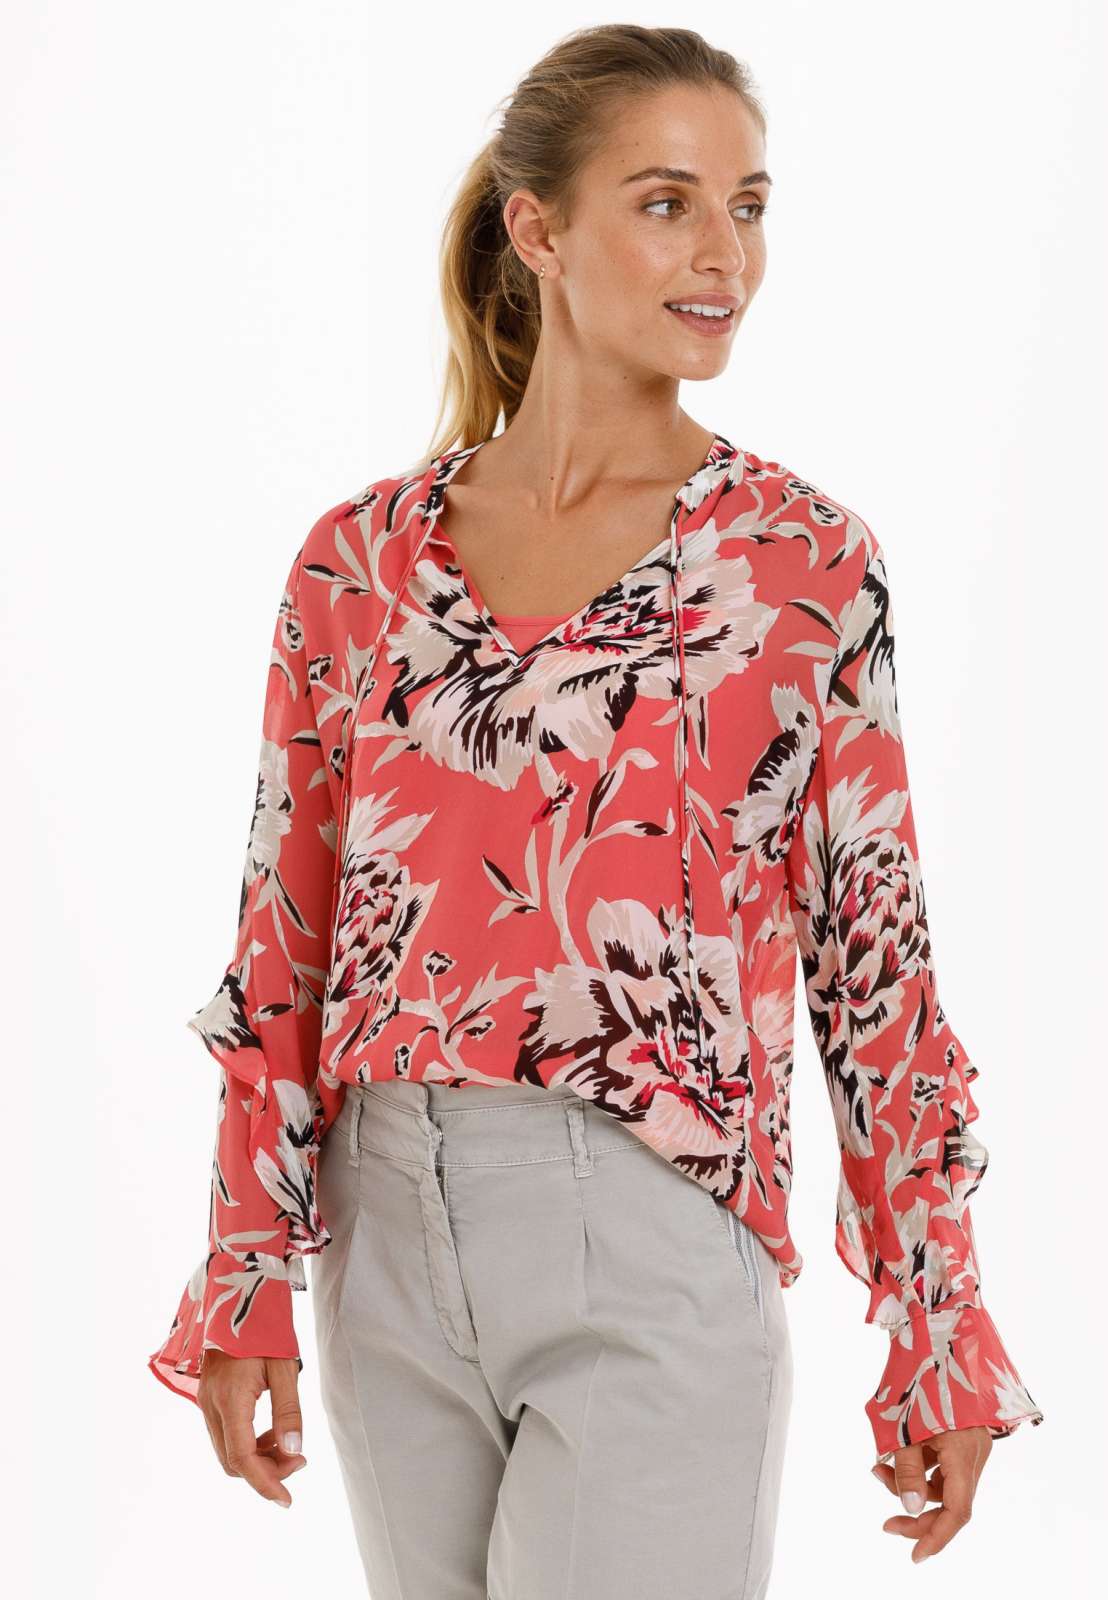 Floral Electric Multi print…has anyone ordered these? I think I'm